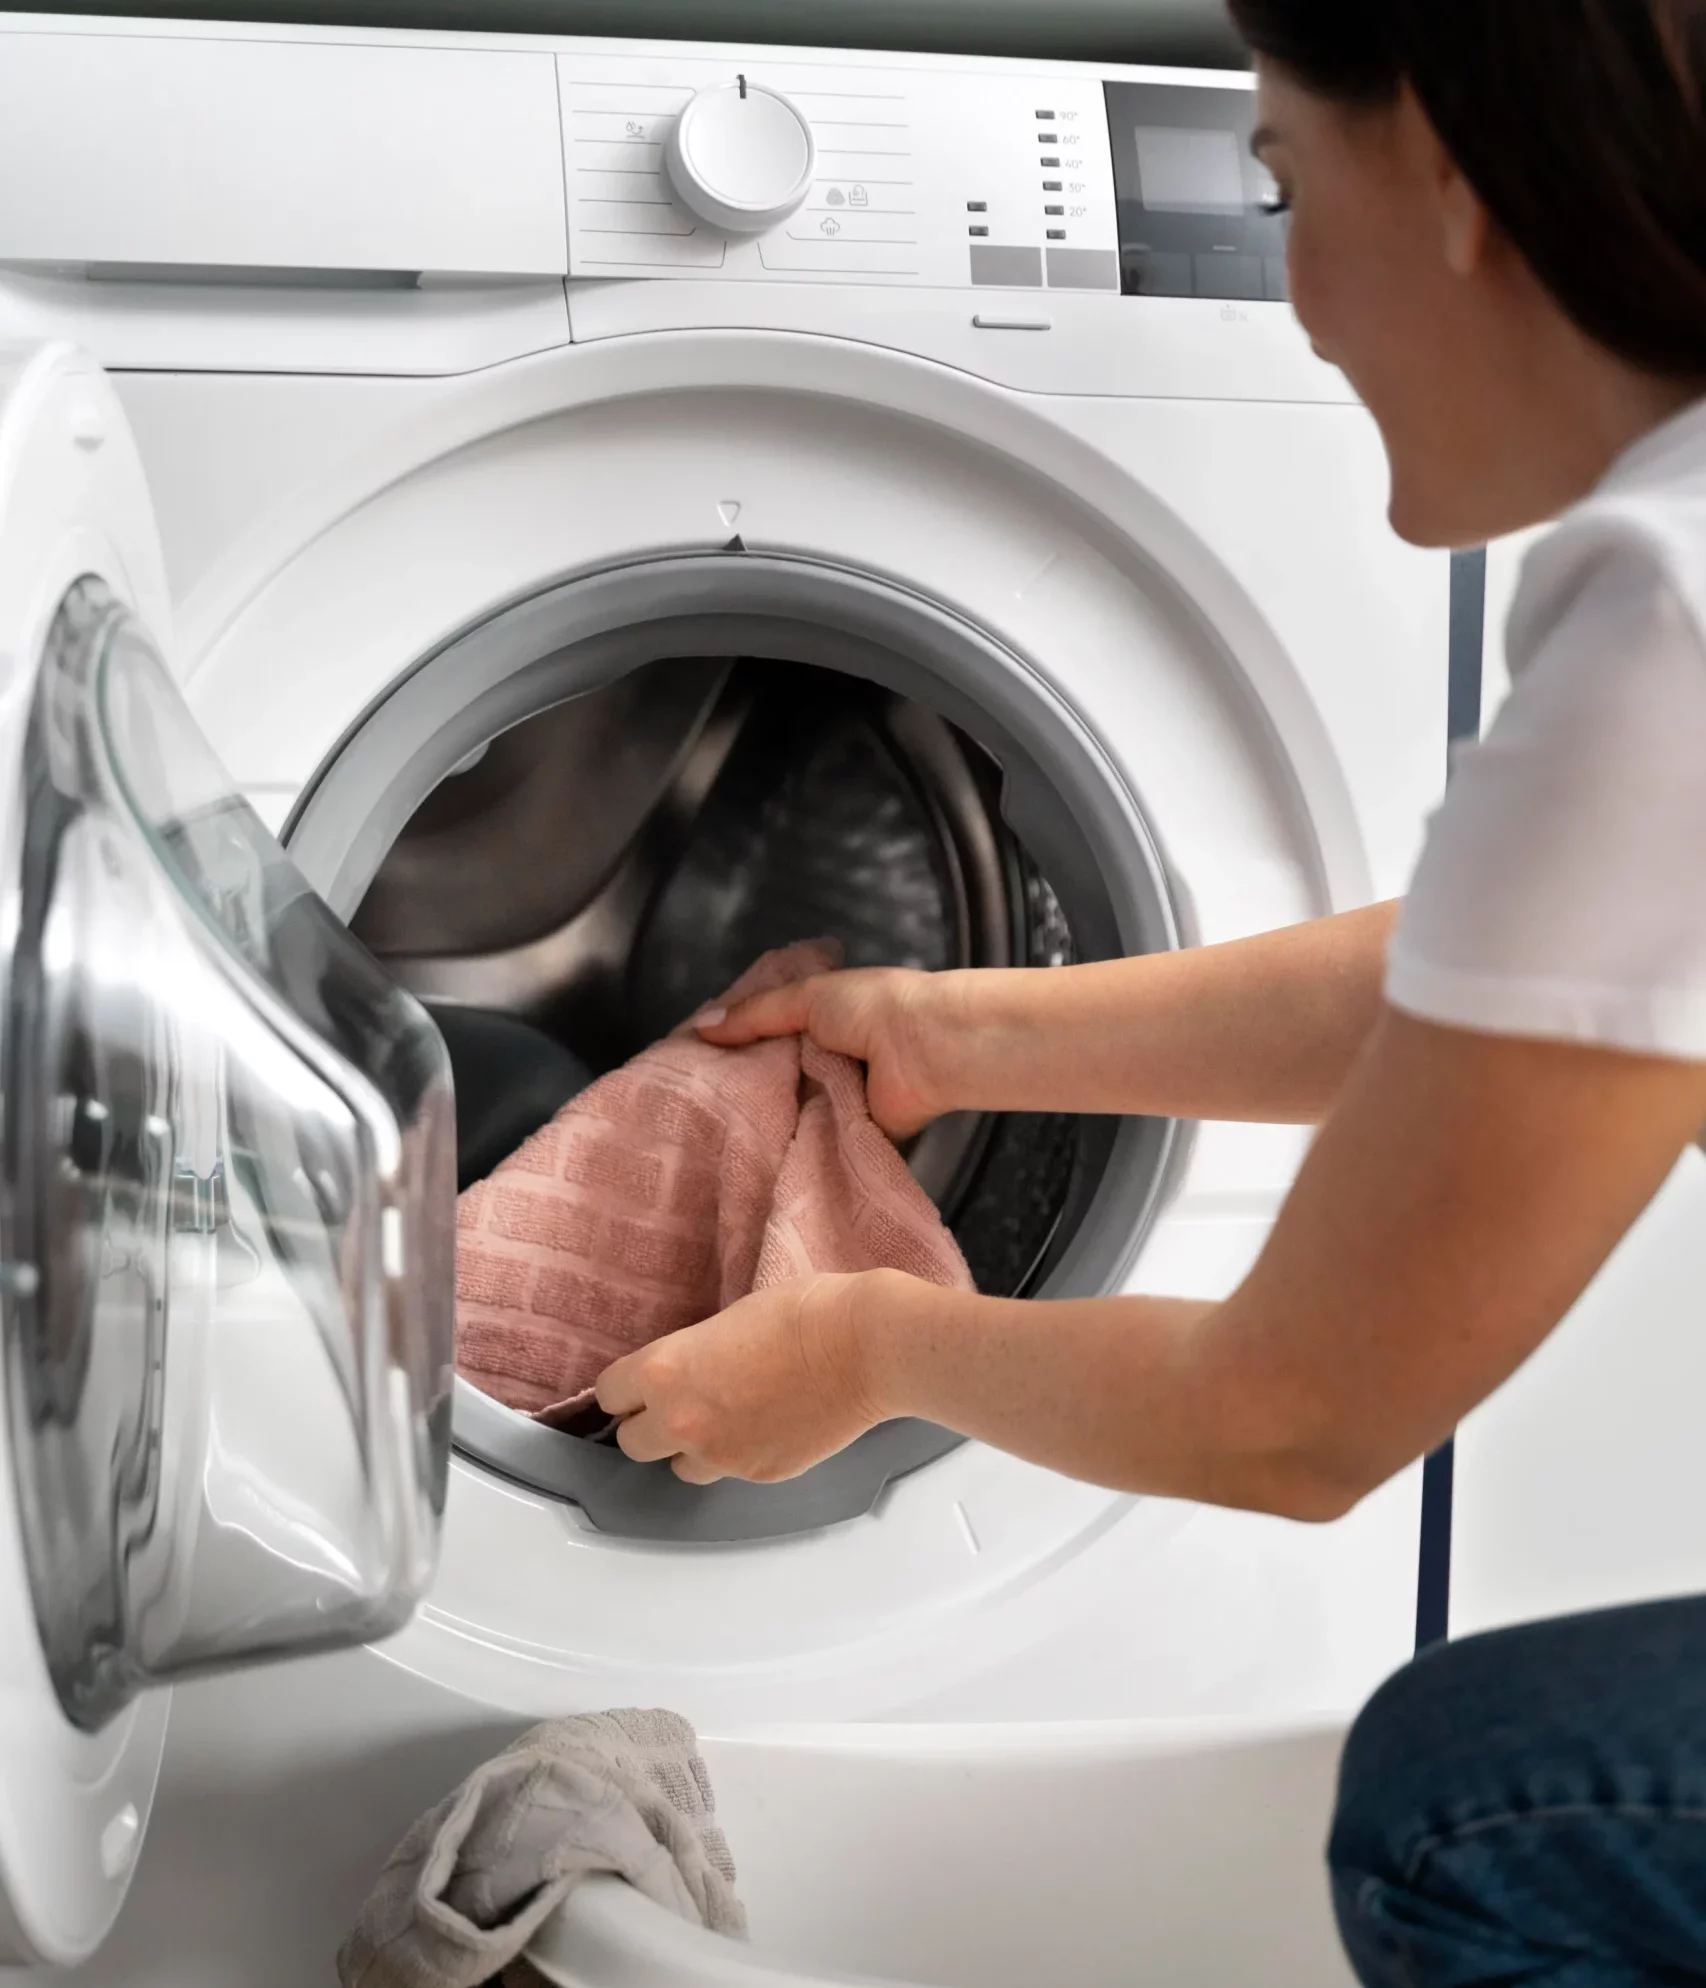 dryer problems and dryer repair in Ottawa